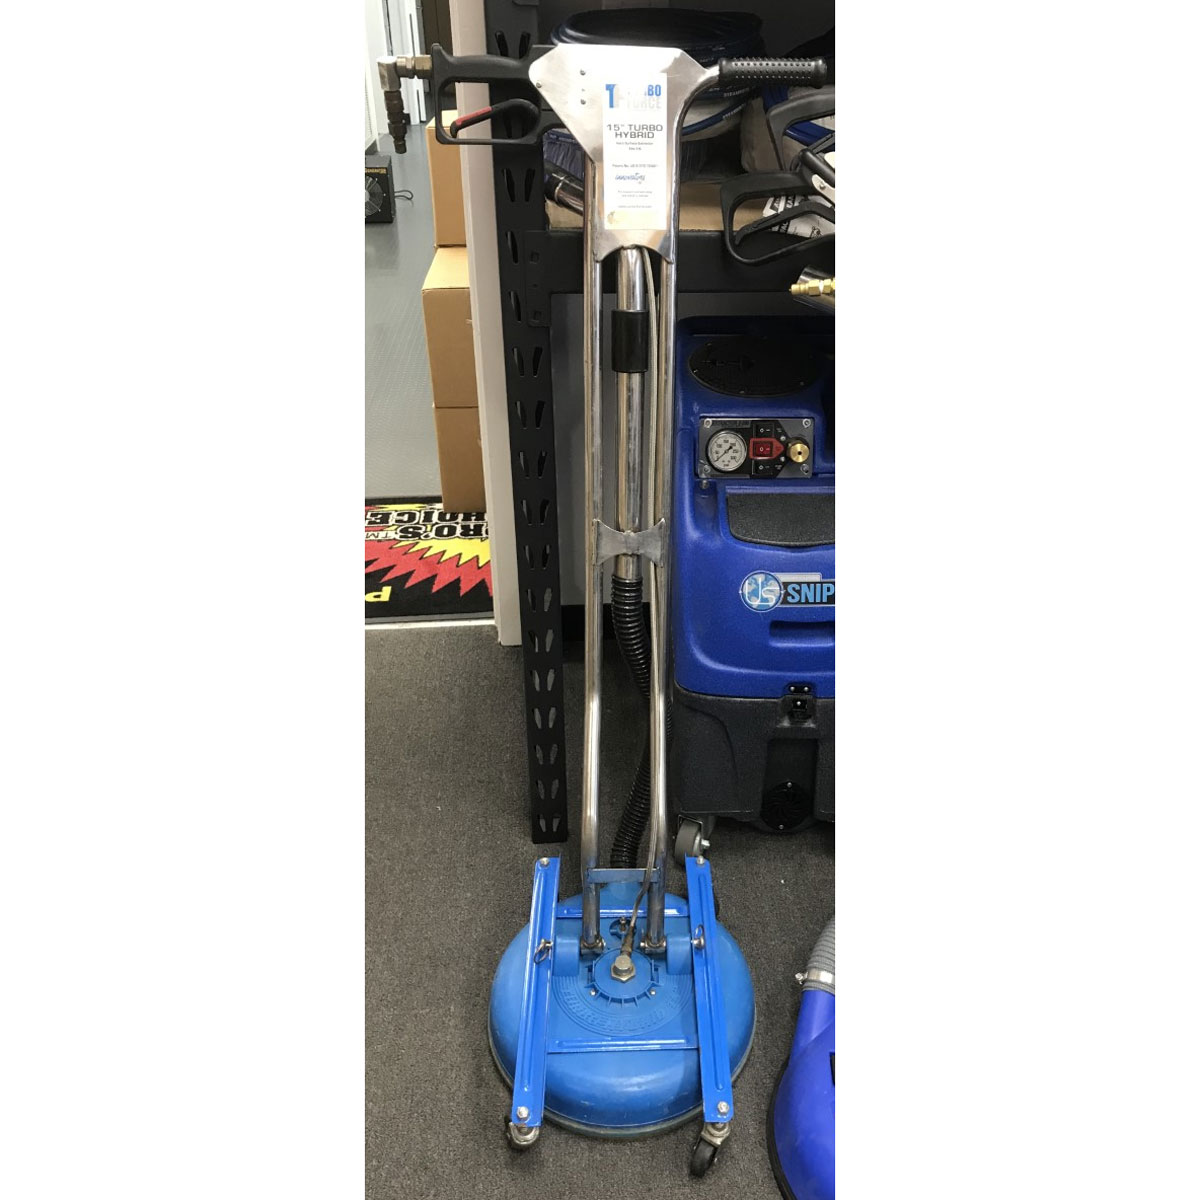 Used Turboforce TH15 Demo Tile and Concrete Cleaning Wand 15 inches TH-15 With Wheels Bundle B+ Rated